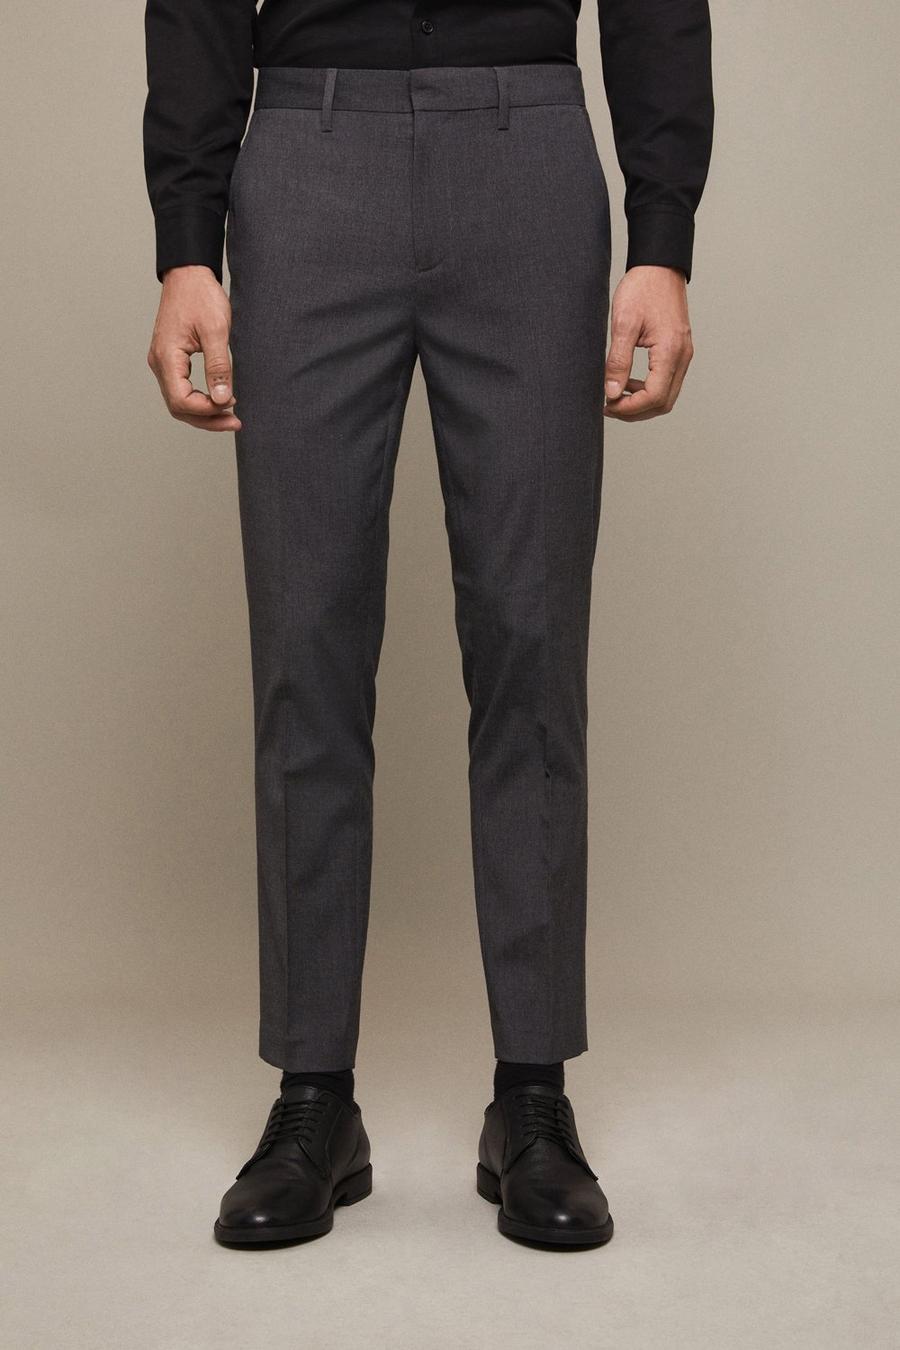 Skinny Fit Charcoal Smart Trousers